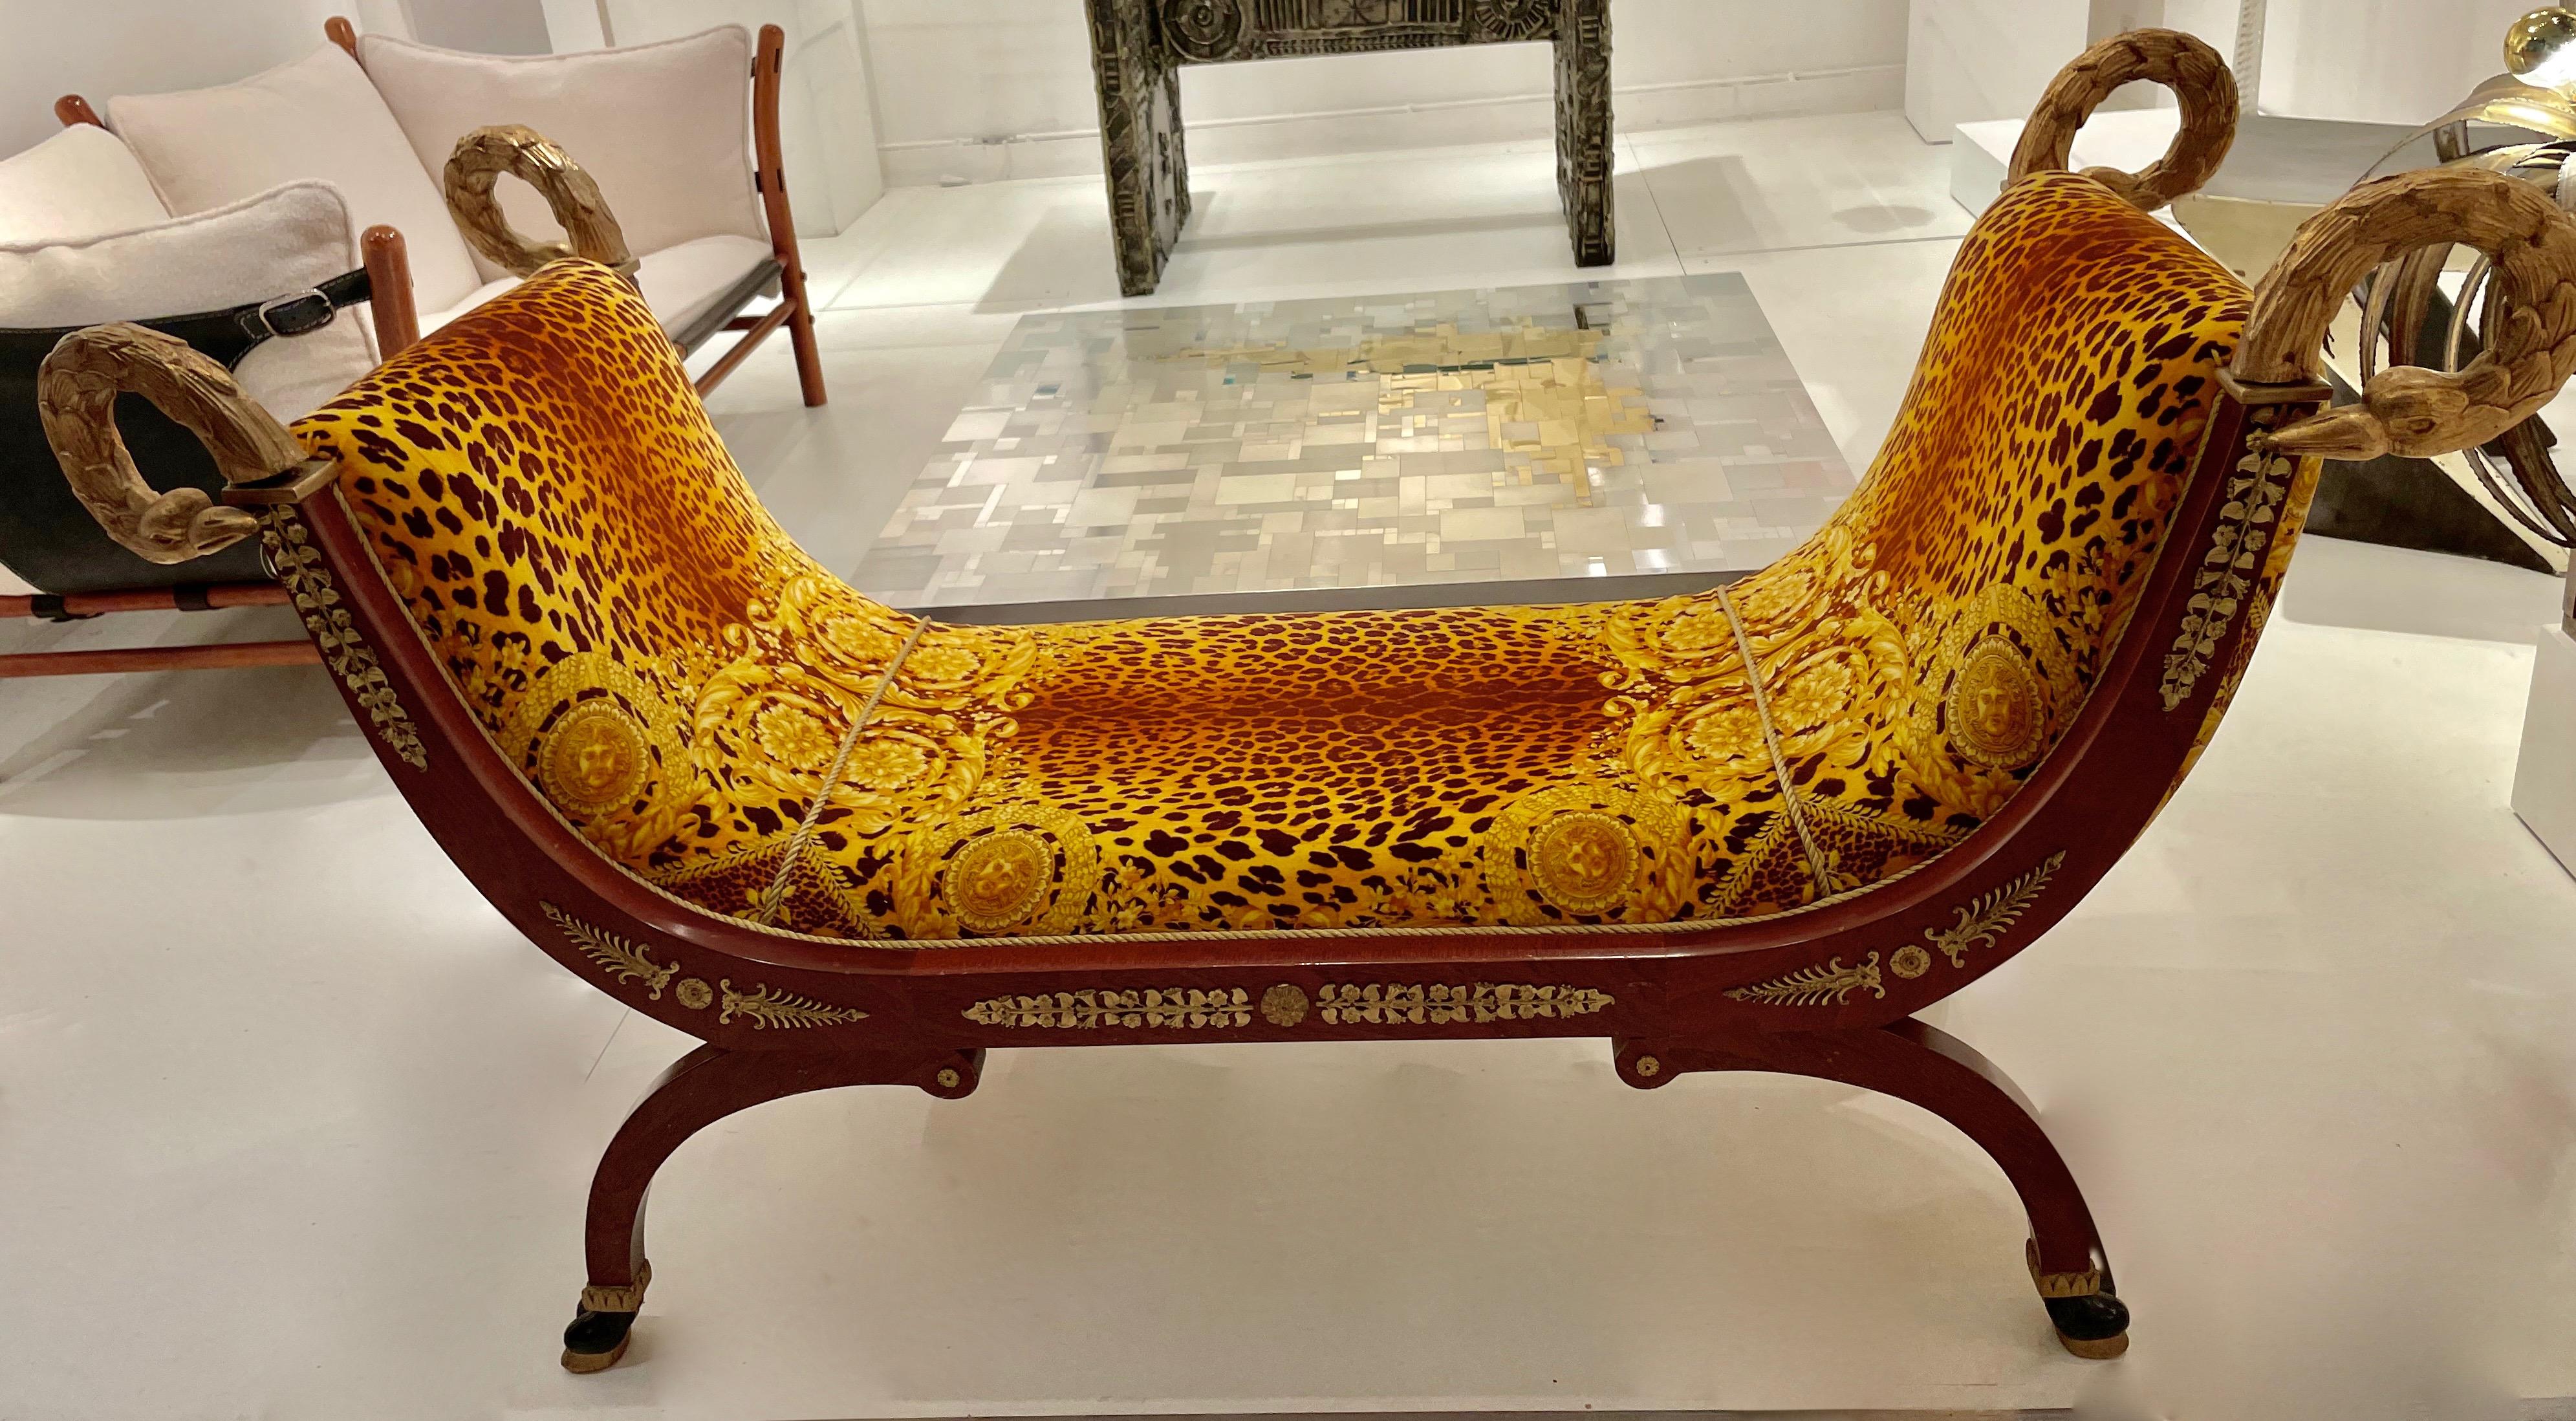 Elegant Empire revival daybed beautifully hand carved with gold leaf swans
heads, brass details and covered with a Gianni Versace silk.
Part of G.Versace furniture collection created in 1984. Palacio collection.
Mint condition.
Italy 1984;